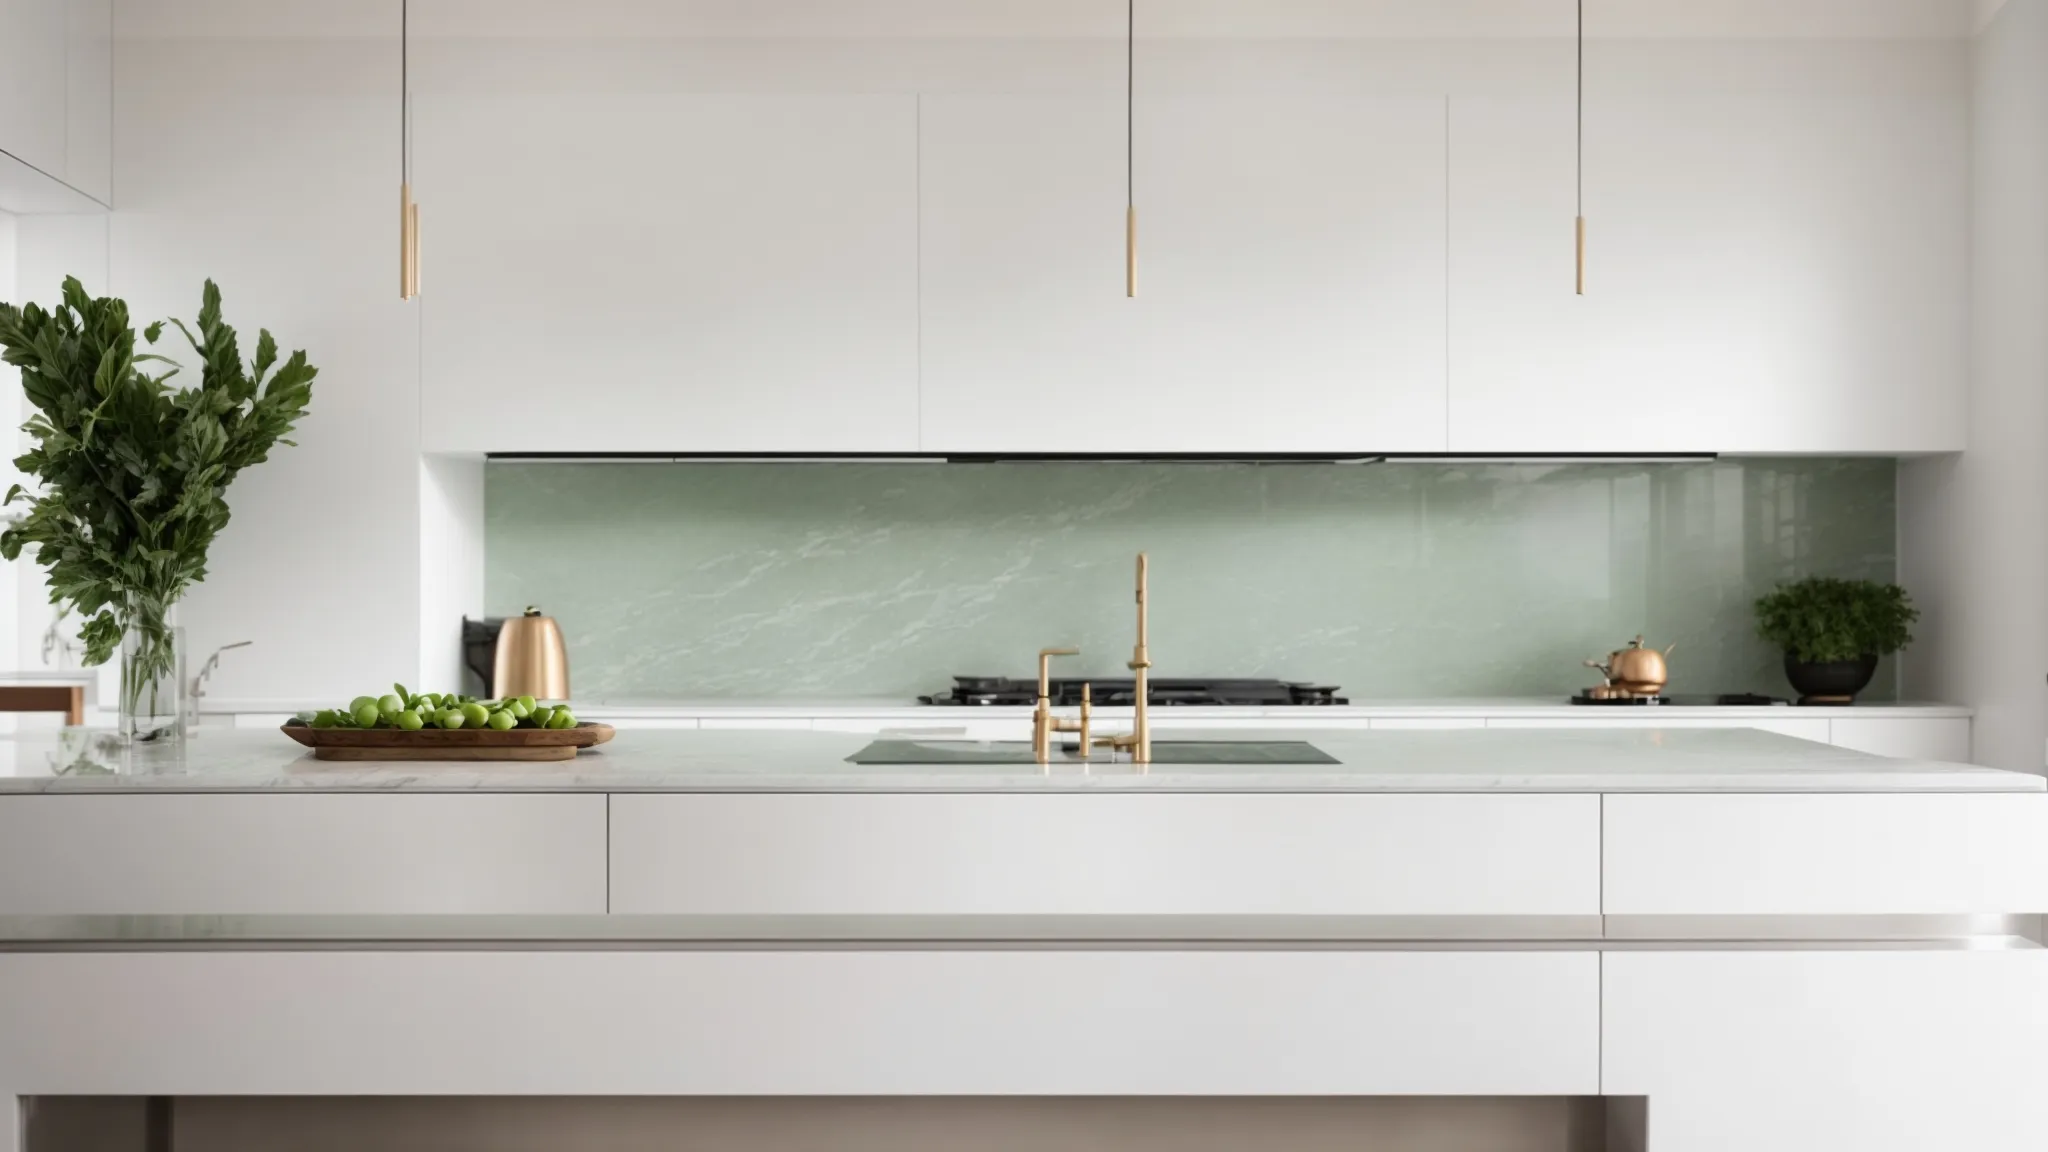 a modern kitchen showcases sleek white cabinetry, a marble countertop, and a solitary vase with a single green leaf, embodying serene minimalism.